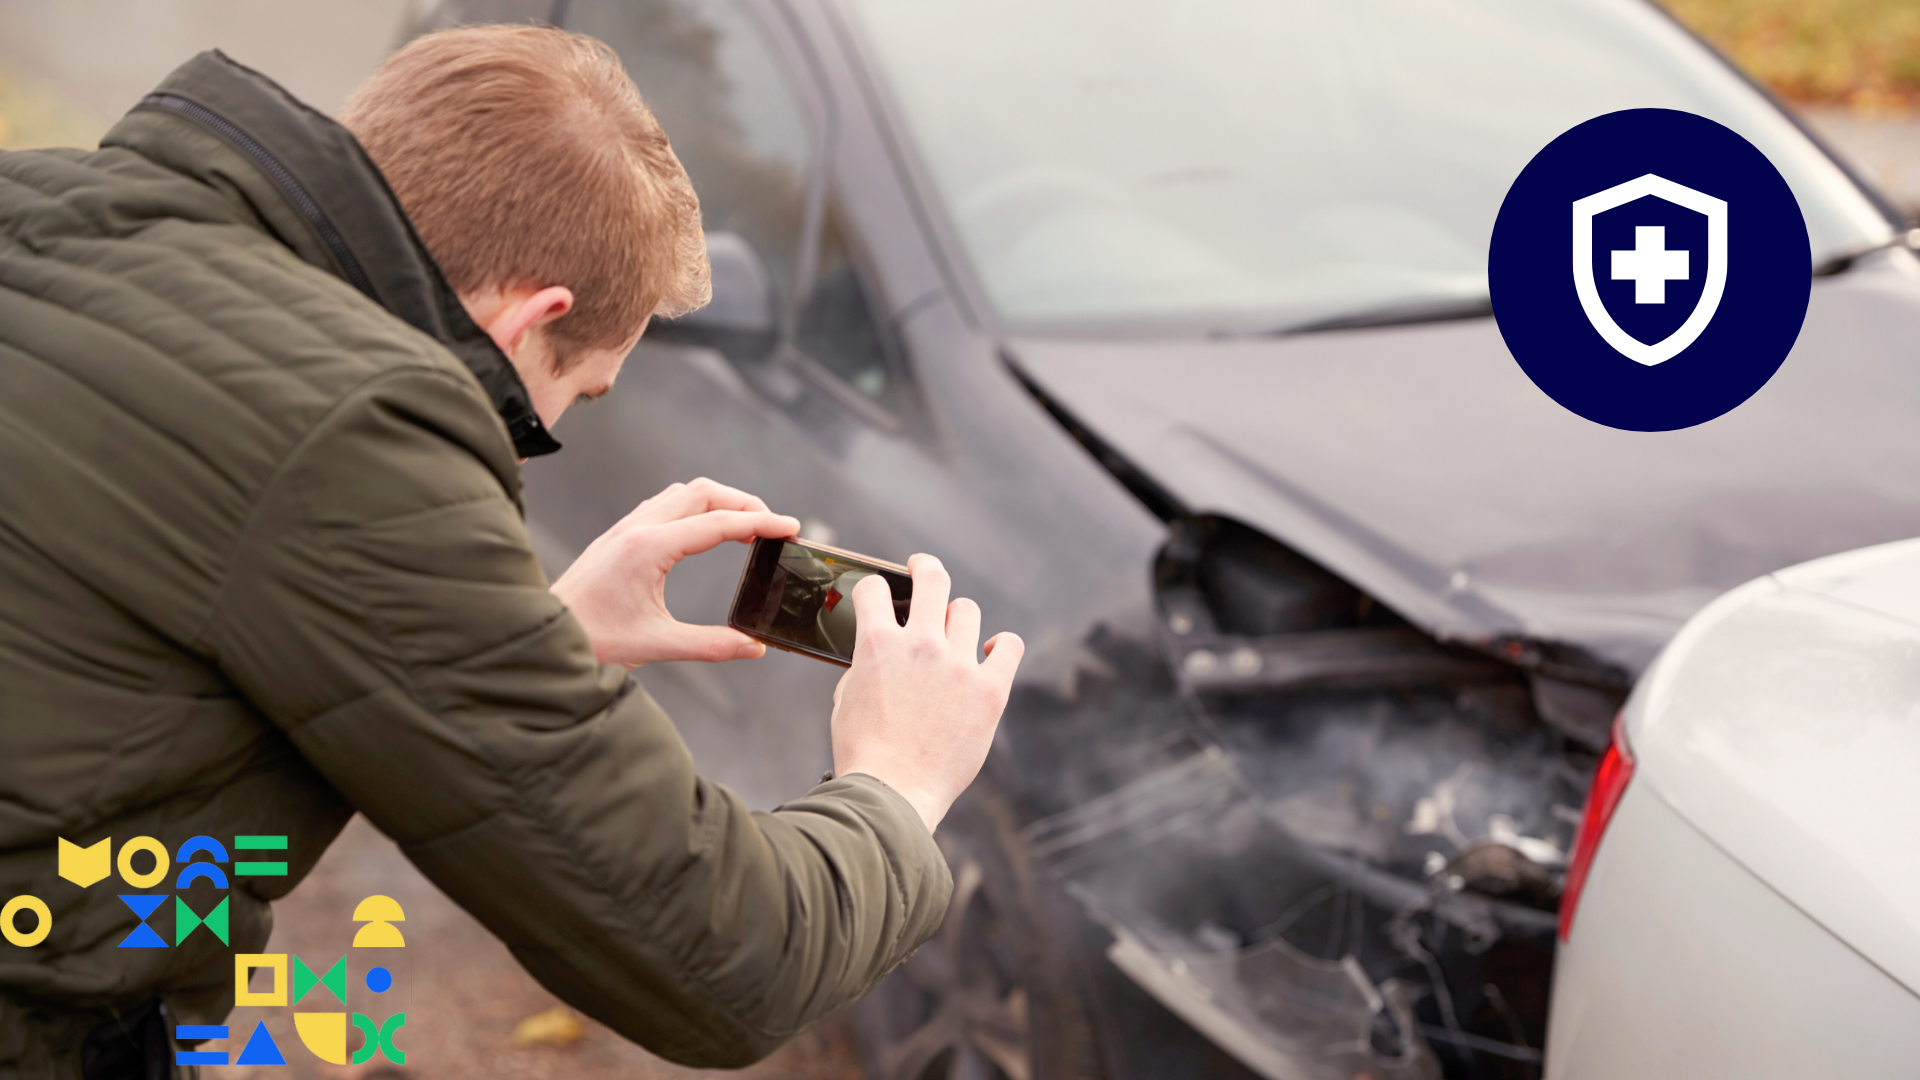 Image of a young man taking a photo on his smartphone of a minor car crash with an image of a shield icon overlaid to represent car insurance